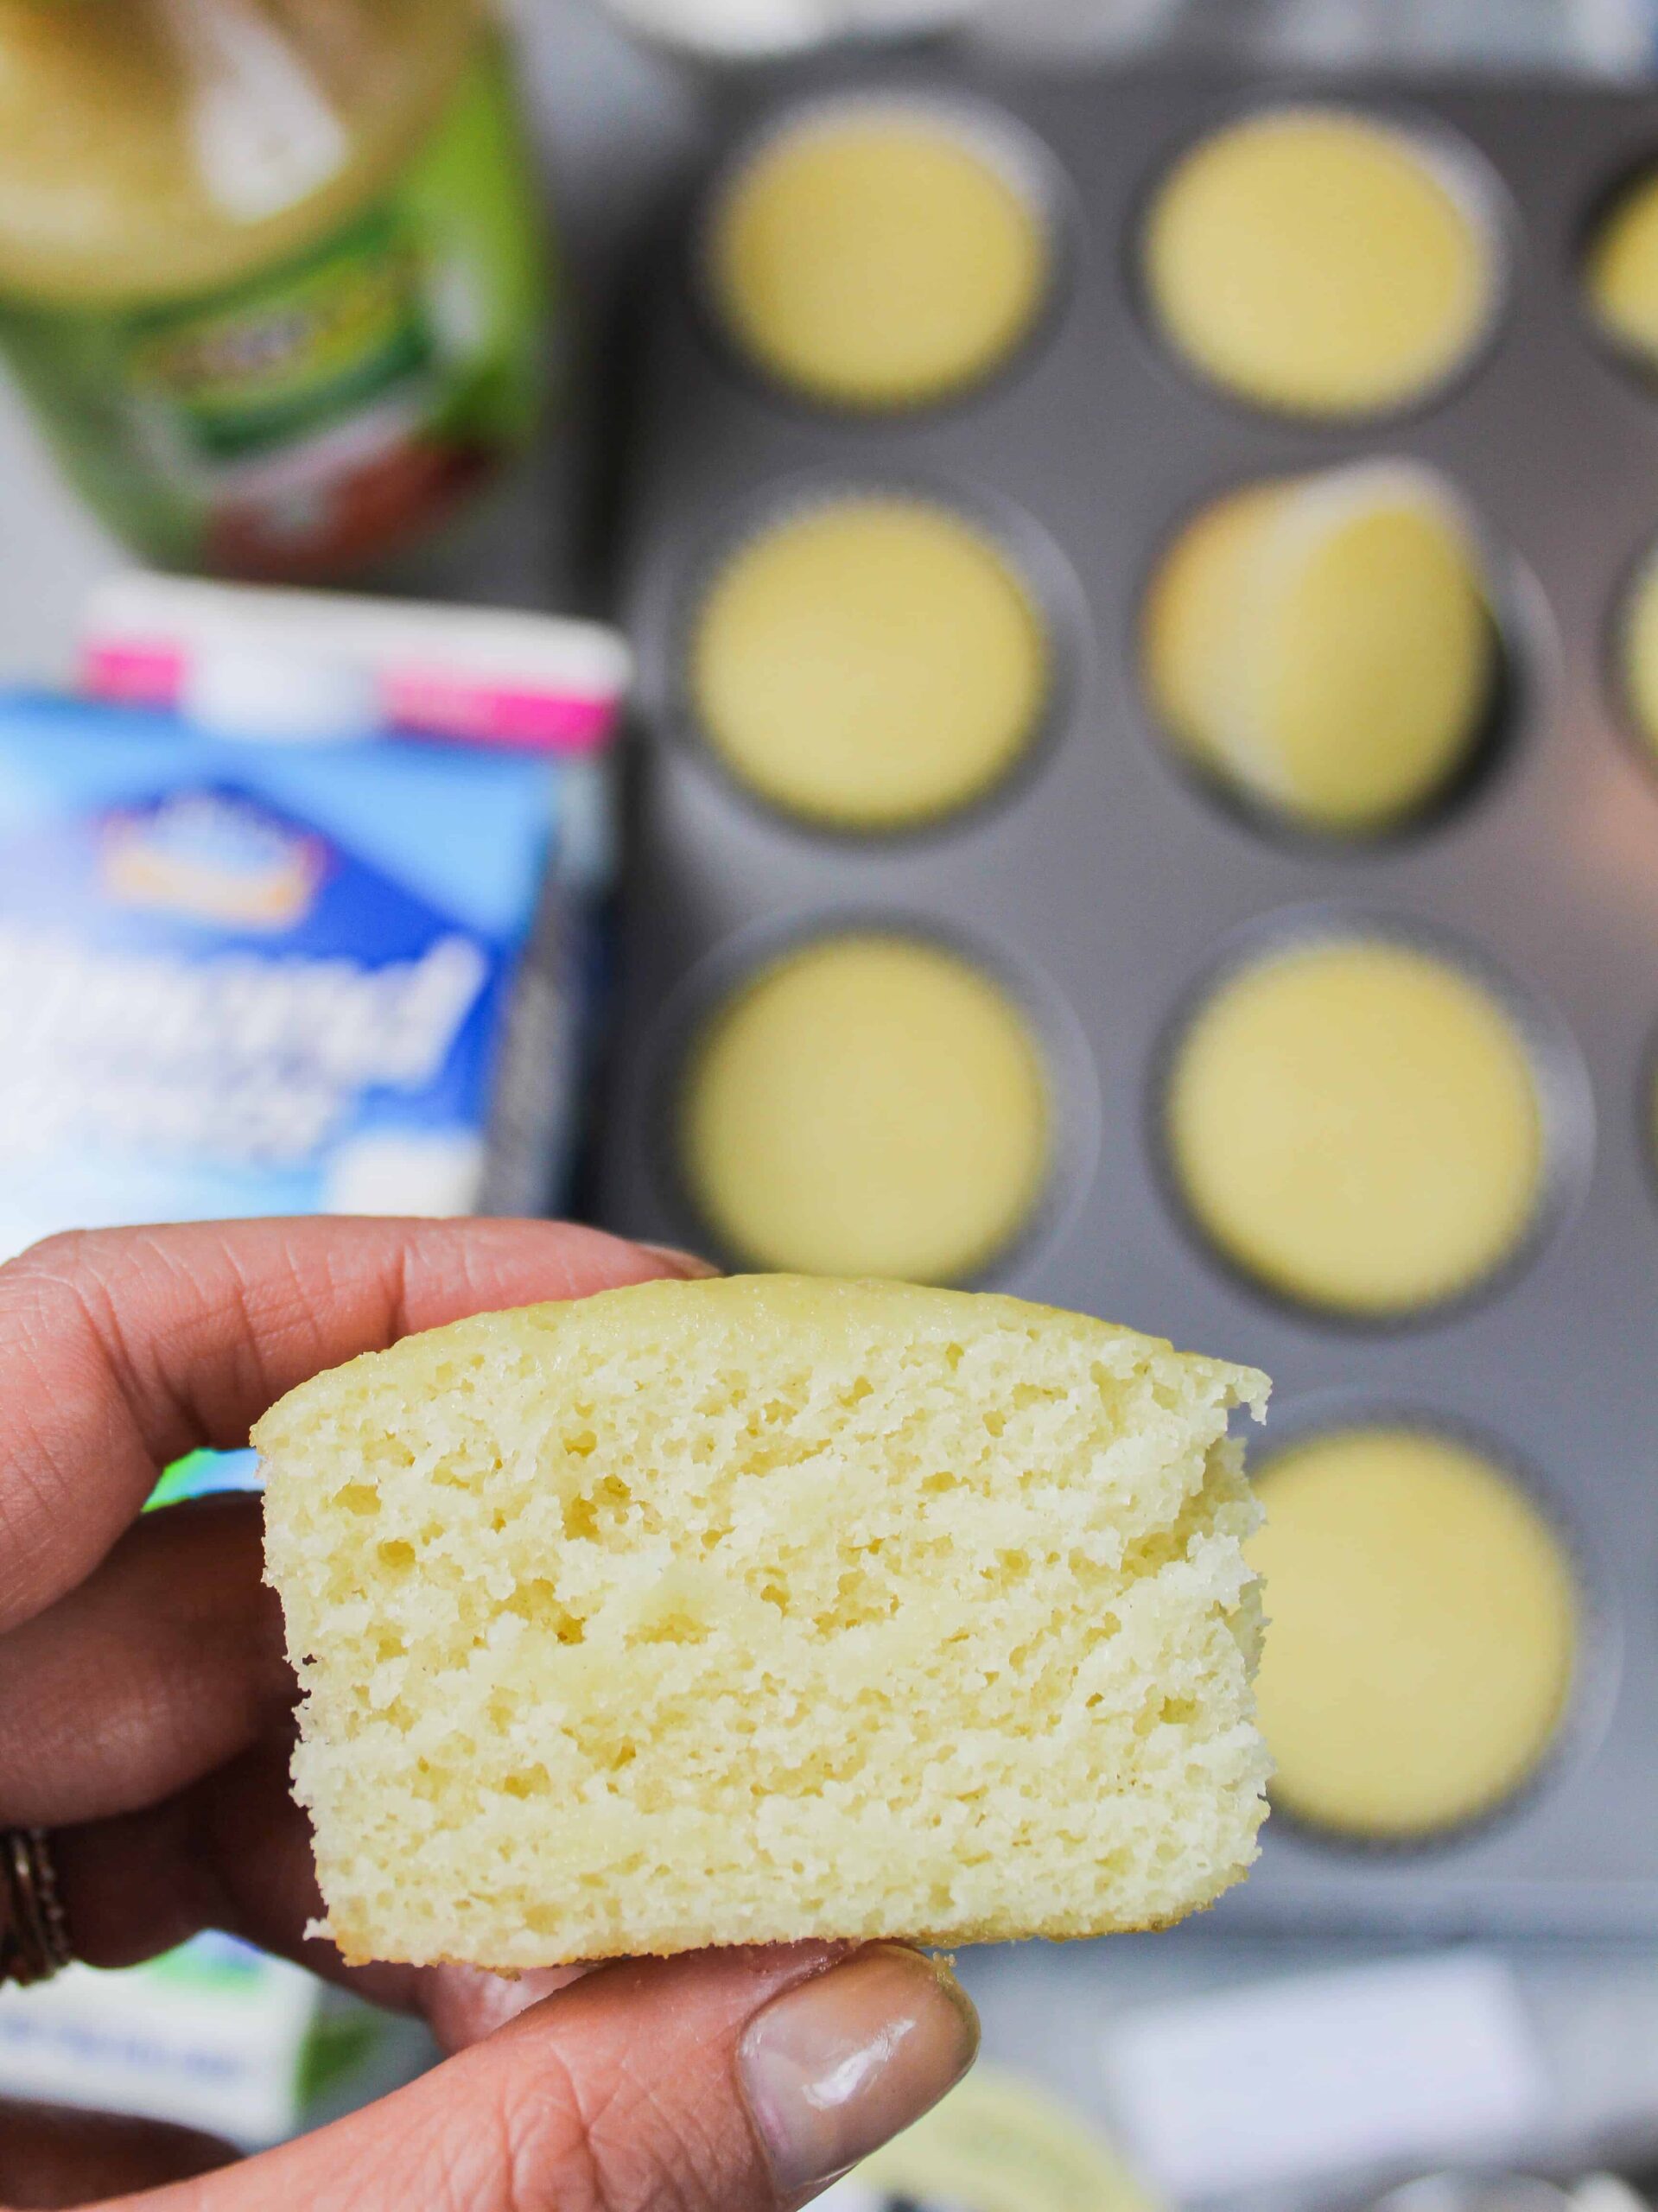 image of dairy and egg free cupcake, cut in half to show how tender and moist the cupcake is